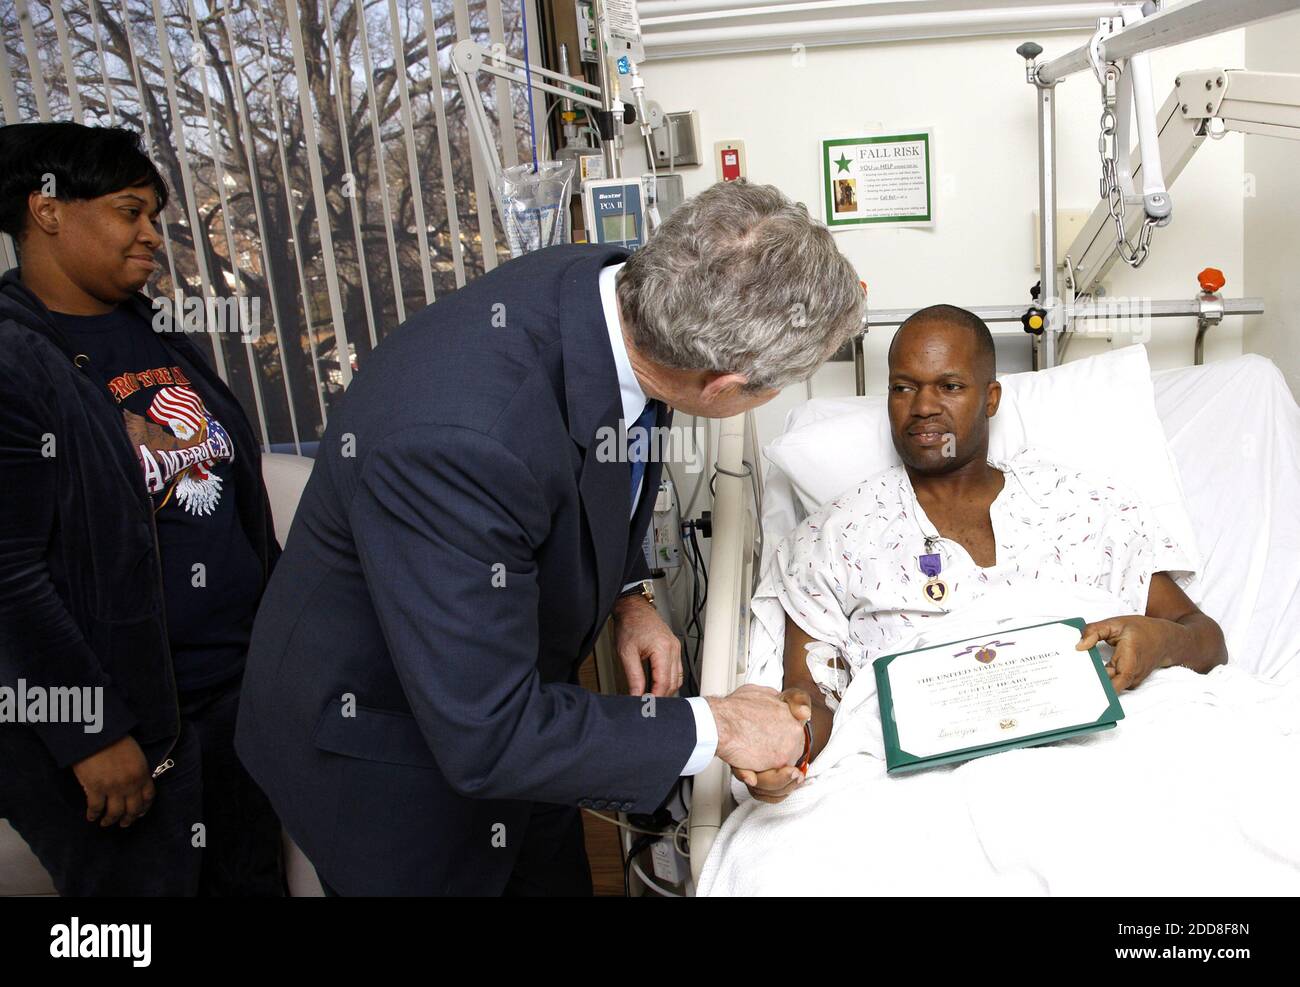 NO FILM, NO VIDEO, NO TV, NO DOCUMENTARY - US President George W. Bush shakes the hand of U.S. Army Sgt. First Class Neal Boyd of Haynesville, La., after presenting him a Purple Heart, during a visit to Walter Reed Army Medical Center, where the soldier is recovering from wounds suffered in Operation Iraqi Freedom, in Washington, DC, USA on Monday, December 22, 2008. Photo by Eric Draper/White House/MCT/ABACAPRESS.COM Stock Photo